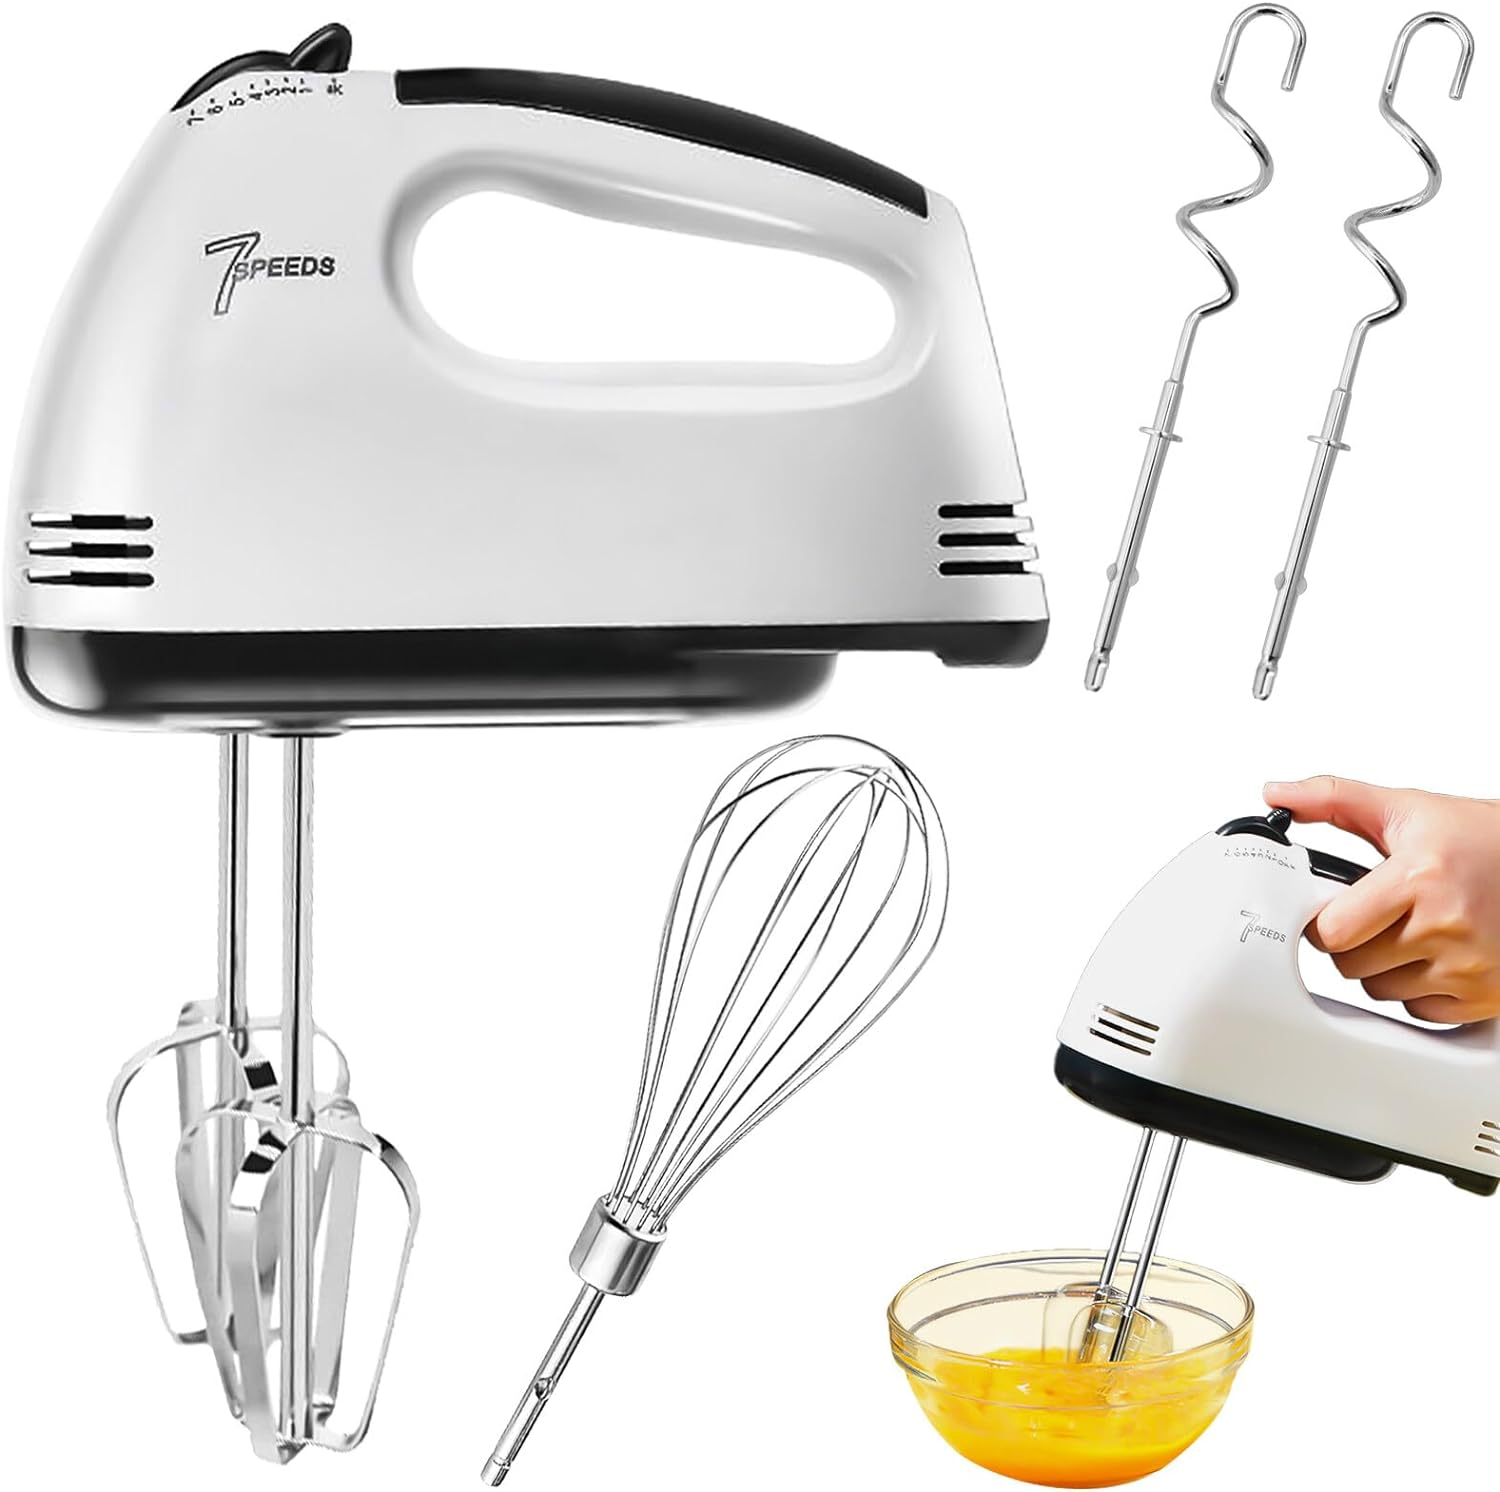 Electric Hand Mixer: 7 Levels Mixer, Hand Mixer With 2 Whisks & 2 Stainless Steel Dough Hooks & 1 Whisk, Electric Whisk with Ergonomic Handle, Mixer Hand Stirrer, Dishwasher Safe